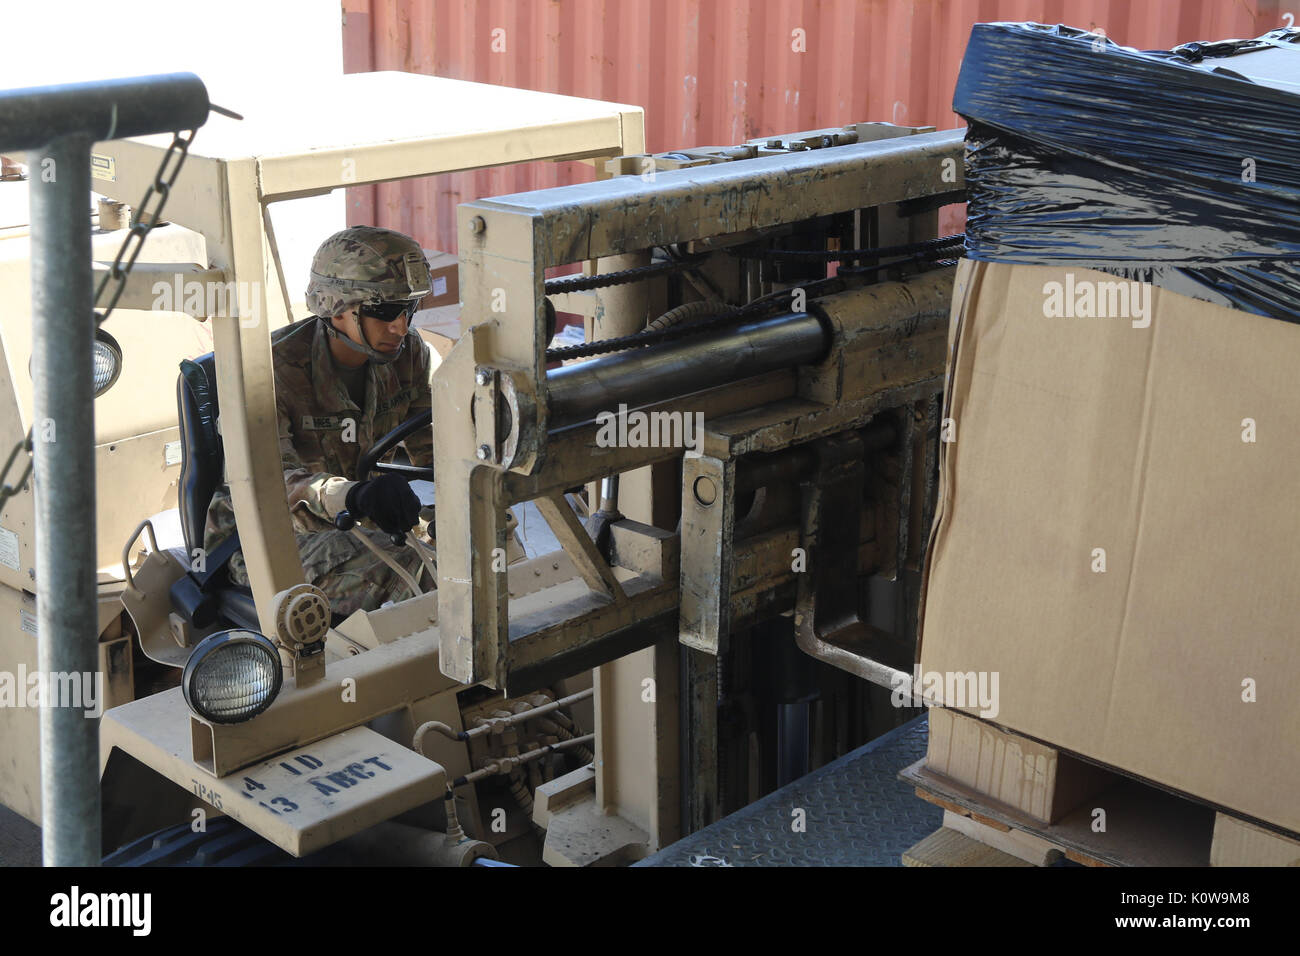 Spc. Gabriel Torres, an automated logistical specialist for Company A, 64th Brigade Support Battalion, 3rd Armored Brigade Combat Team, 4th Infantry Division, uses a forklift to move supplies for a resupply mission at Grafenwoehr Training Area, Germany, Aug. 15, 2017. The BSB is the key supplier for 3rd ABCT battalions providing a persistent presence across eastern Europe to deter aggression against NATO Allies and partners. (U.S. Army photo by Staff Sgt. Ange Desinor, 3rd Armored Brigade Combat Team, 4th Infantry Division) Stock Photo